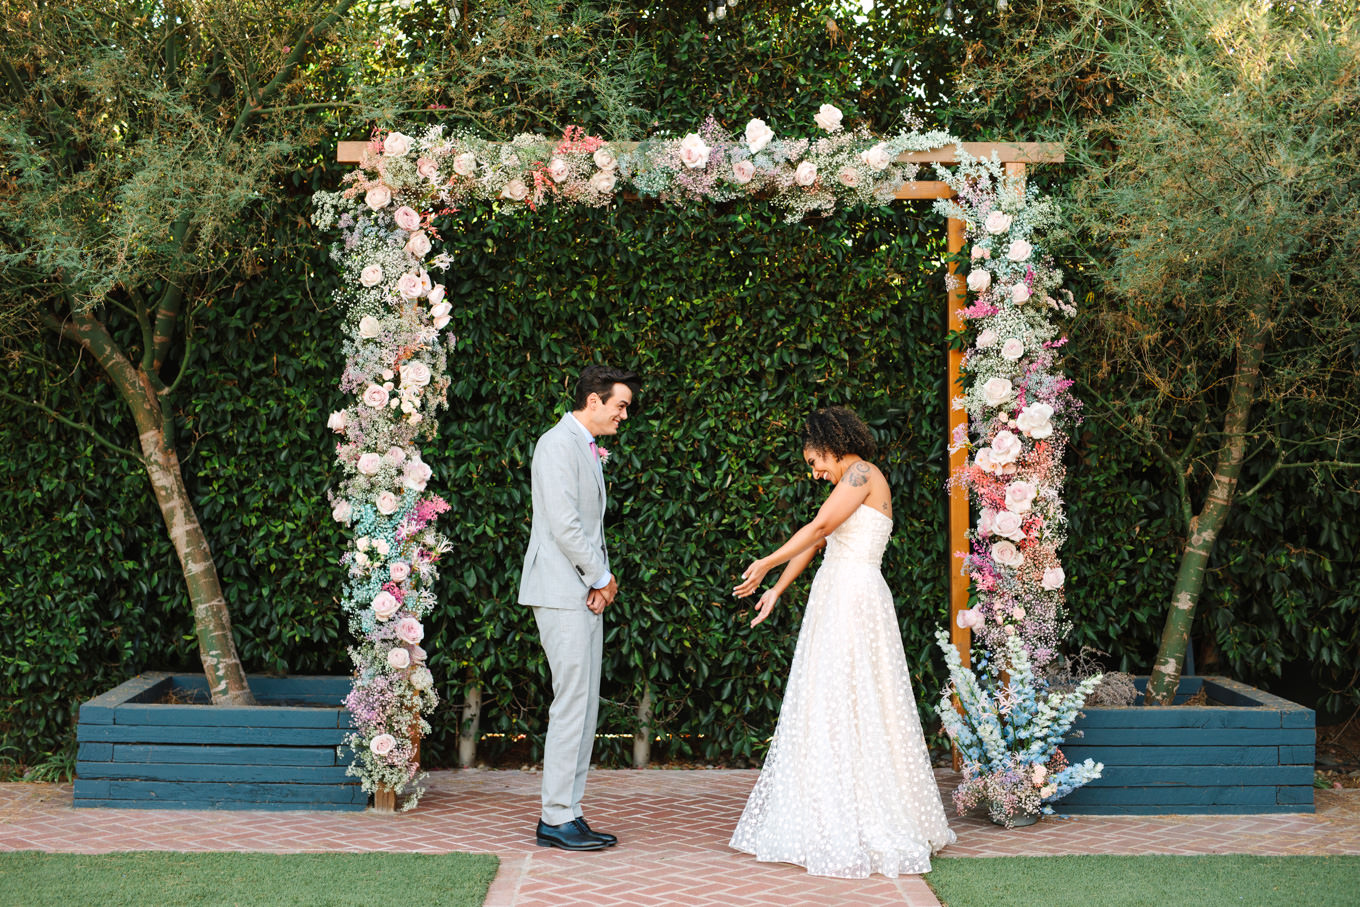 Bride and groom first look | Colorful pop-up micro wedding at The Ruby Street Los Angeles featured on Green Wedding Shoes | Colorful and elevated photography for fun-loving couples in Southern California | #colorfulwedding #popupwedding #weddingphotography #microwedding Source: Mary Costa Photography | Los Angeles